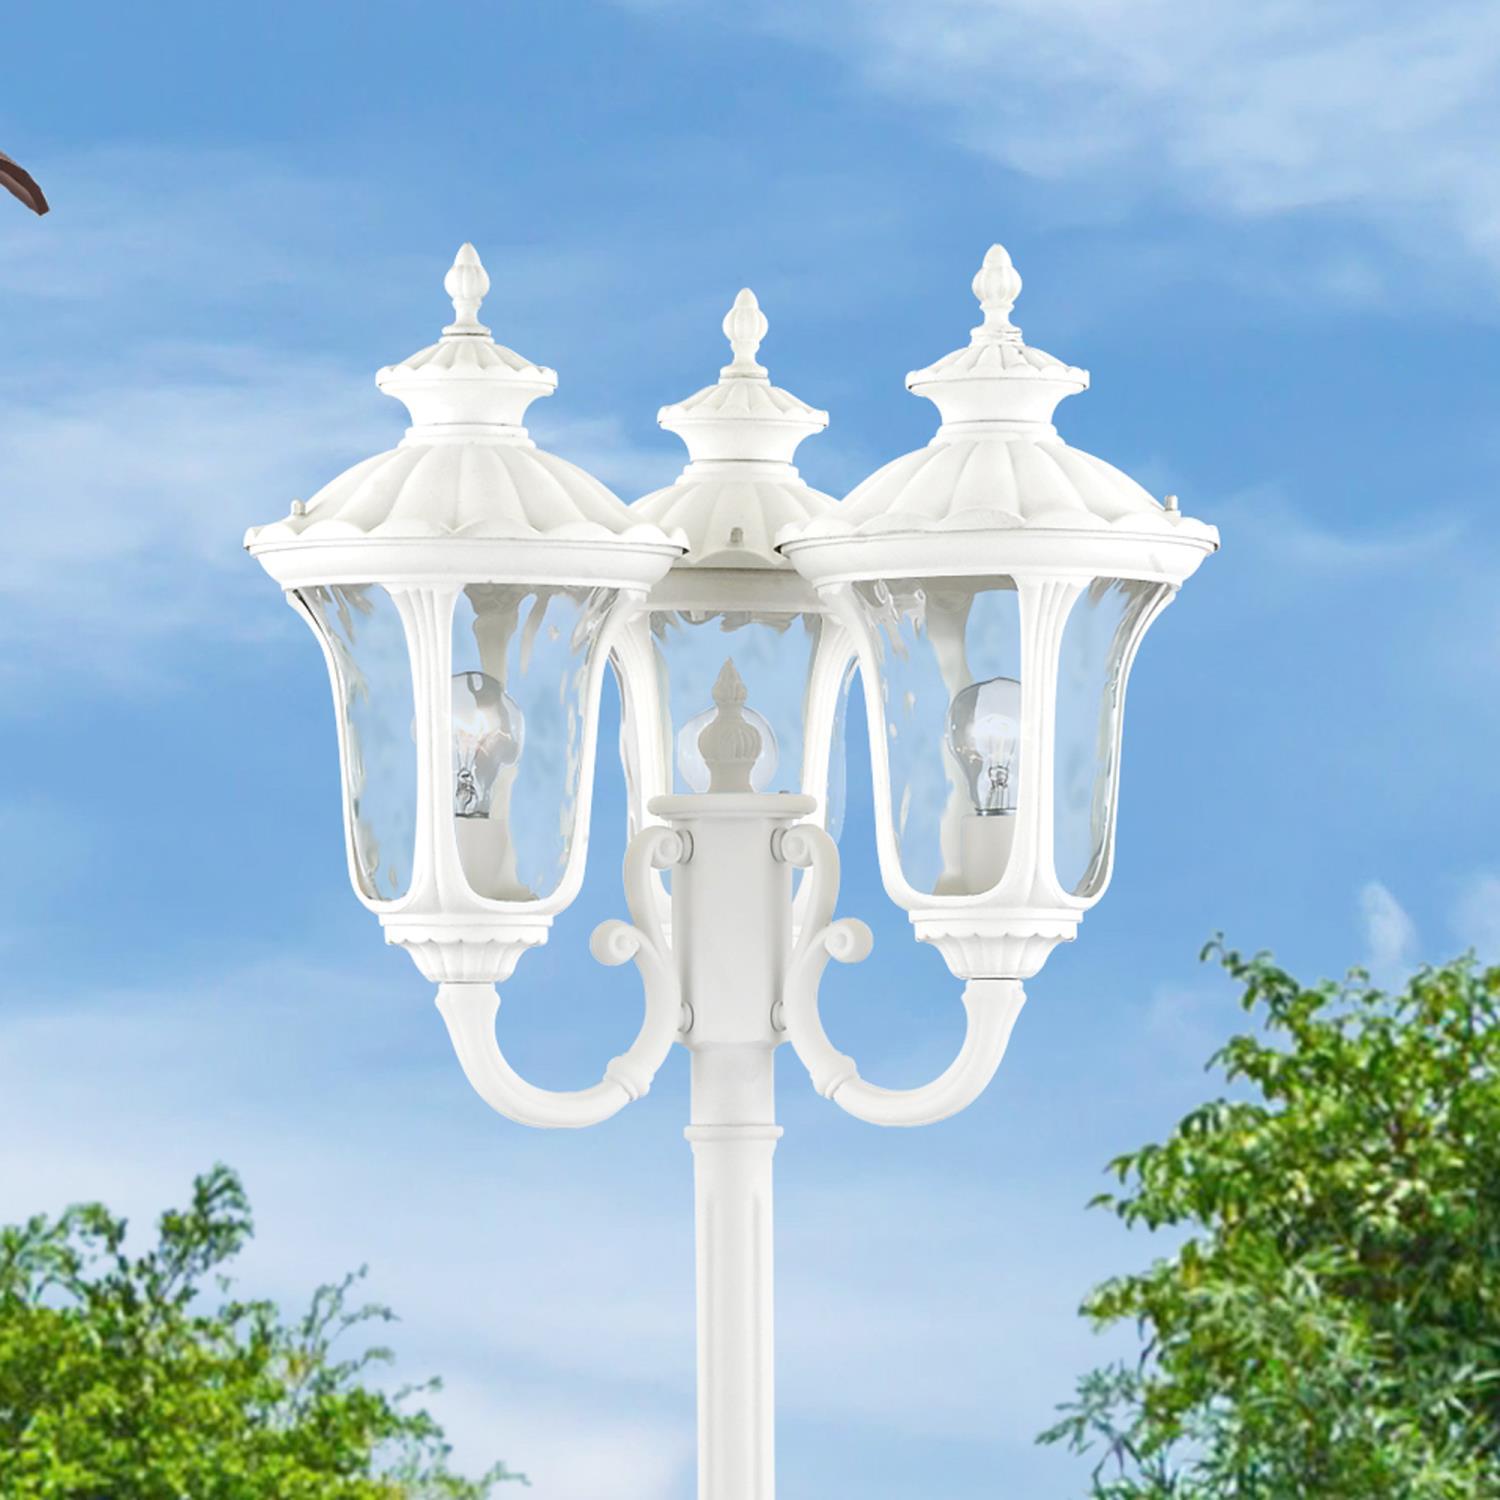 Livex Lighting 3 Light Outdoor Post Light With Textured White Finish 7866-13 - image 4 of 7